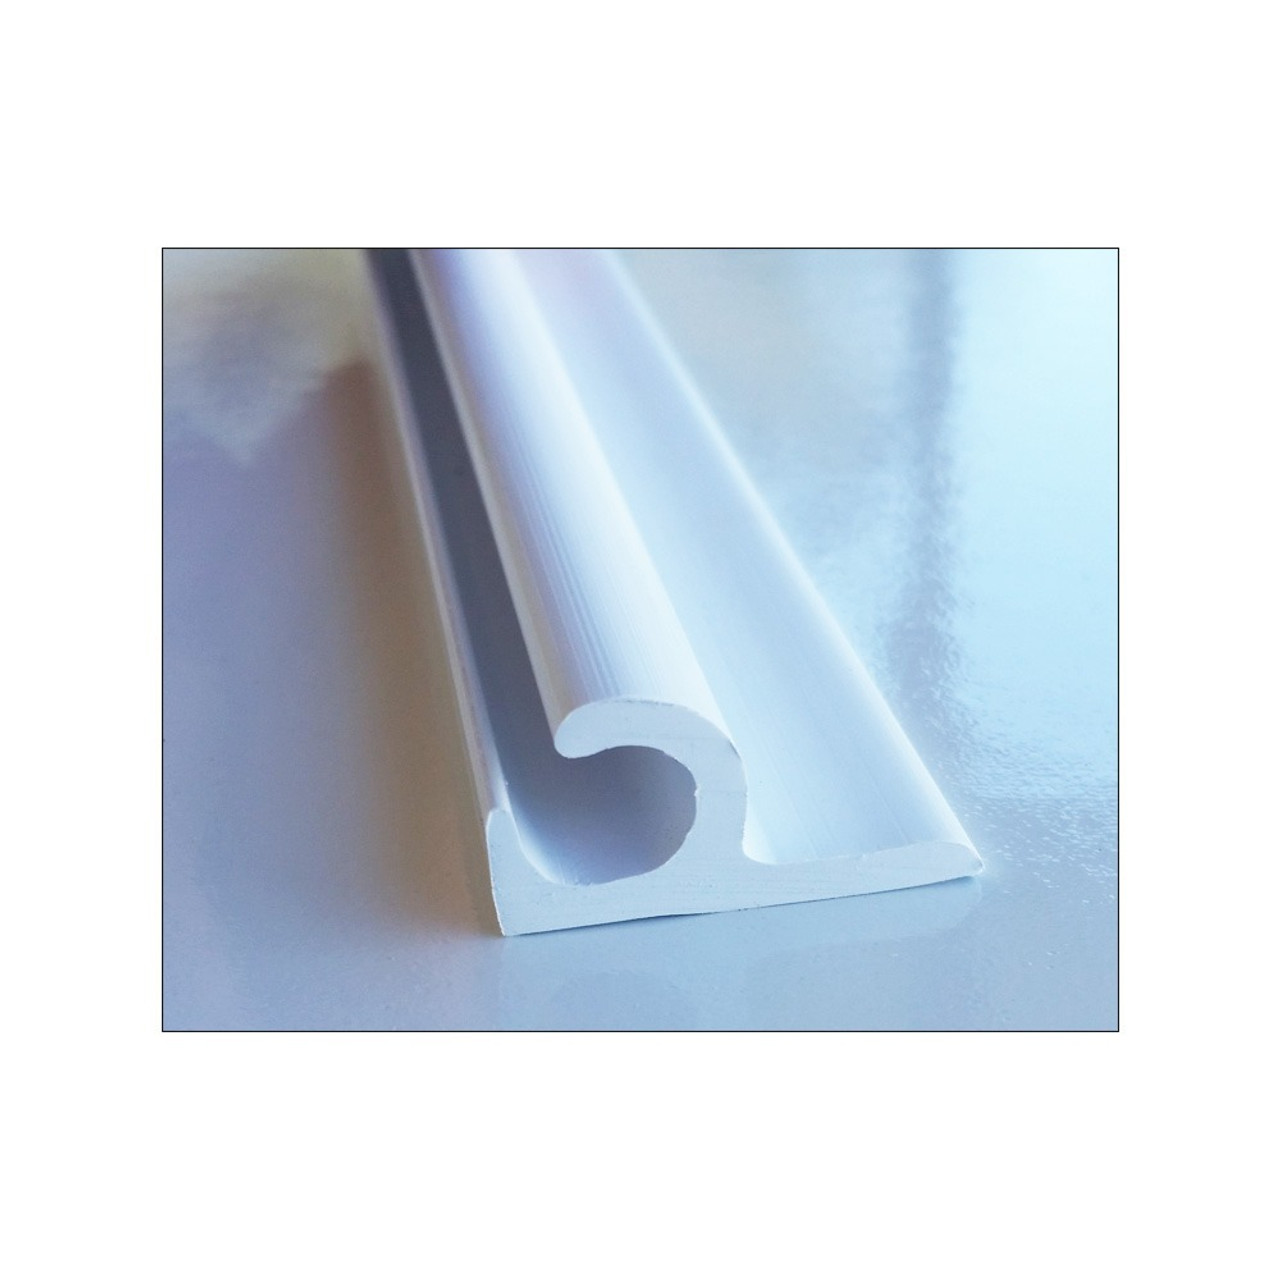 Buy Wholesale Awning Rail, Track and Keder - NEPCO ~ Sign